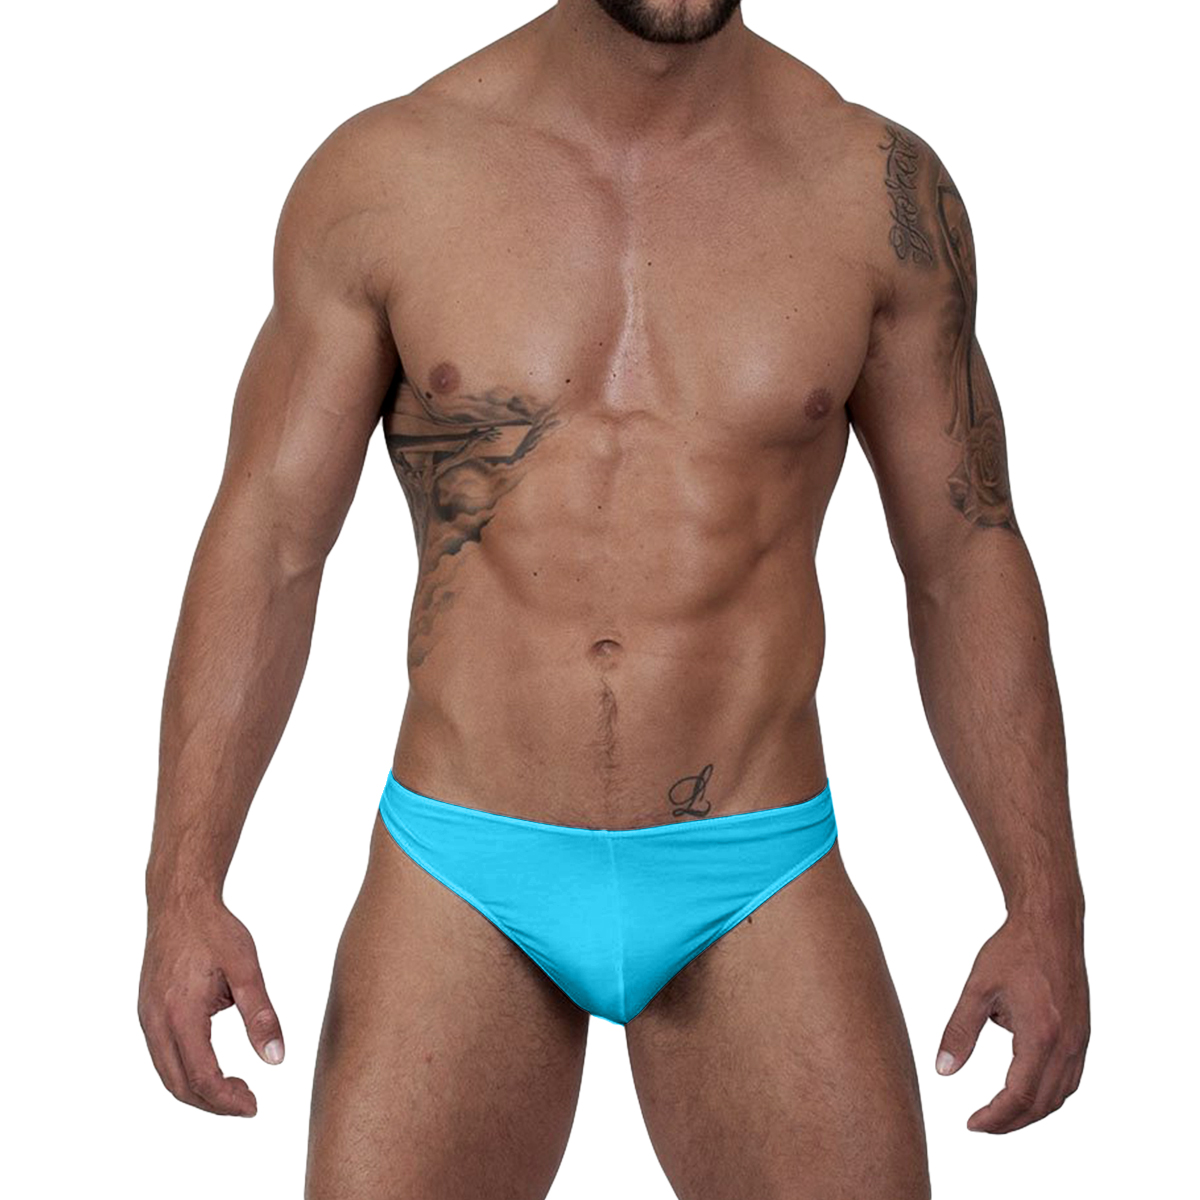 BUY ANY 2 GET 1 FREE Doreanse Classic Soft Cotton Thong String Men's Underwear